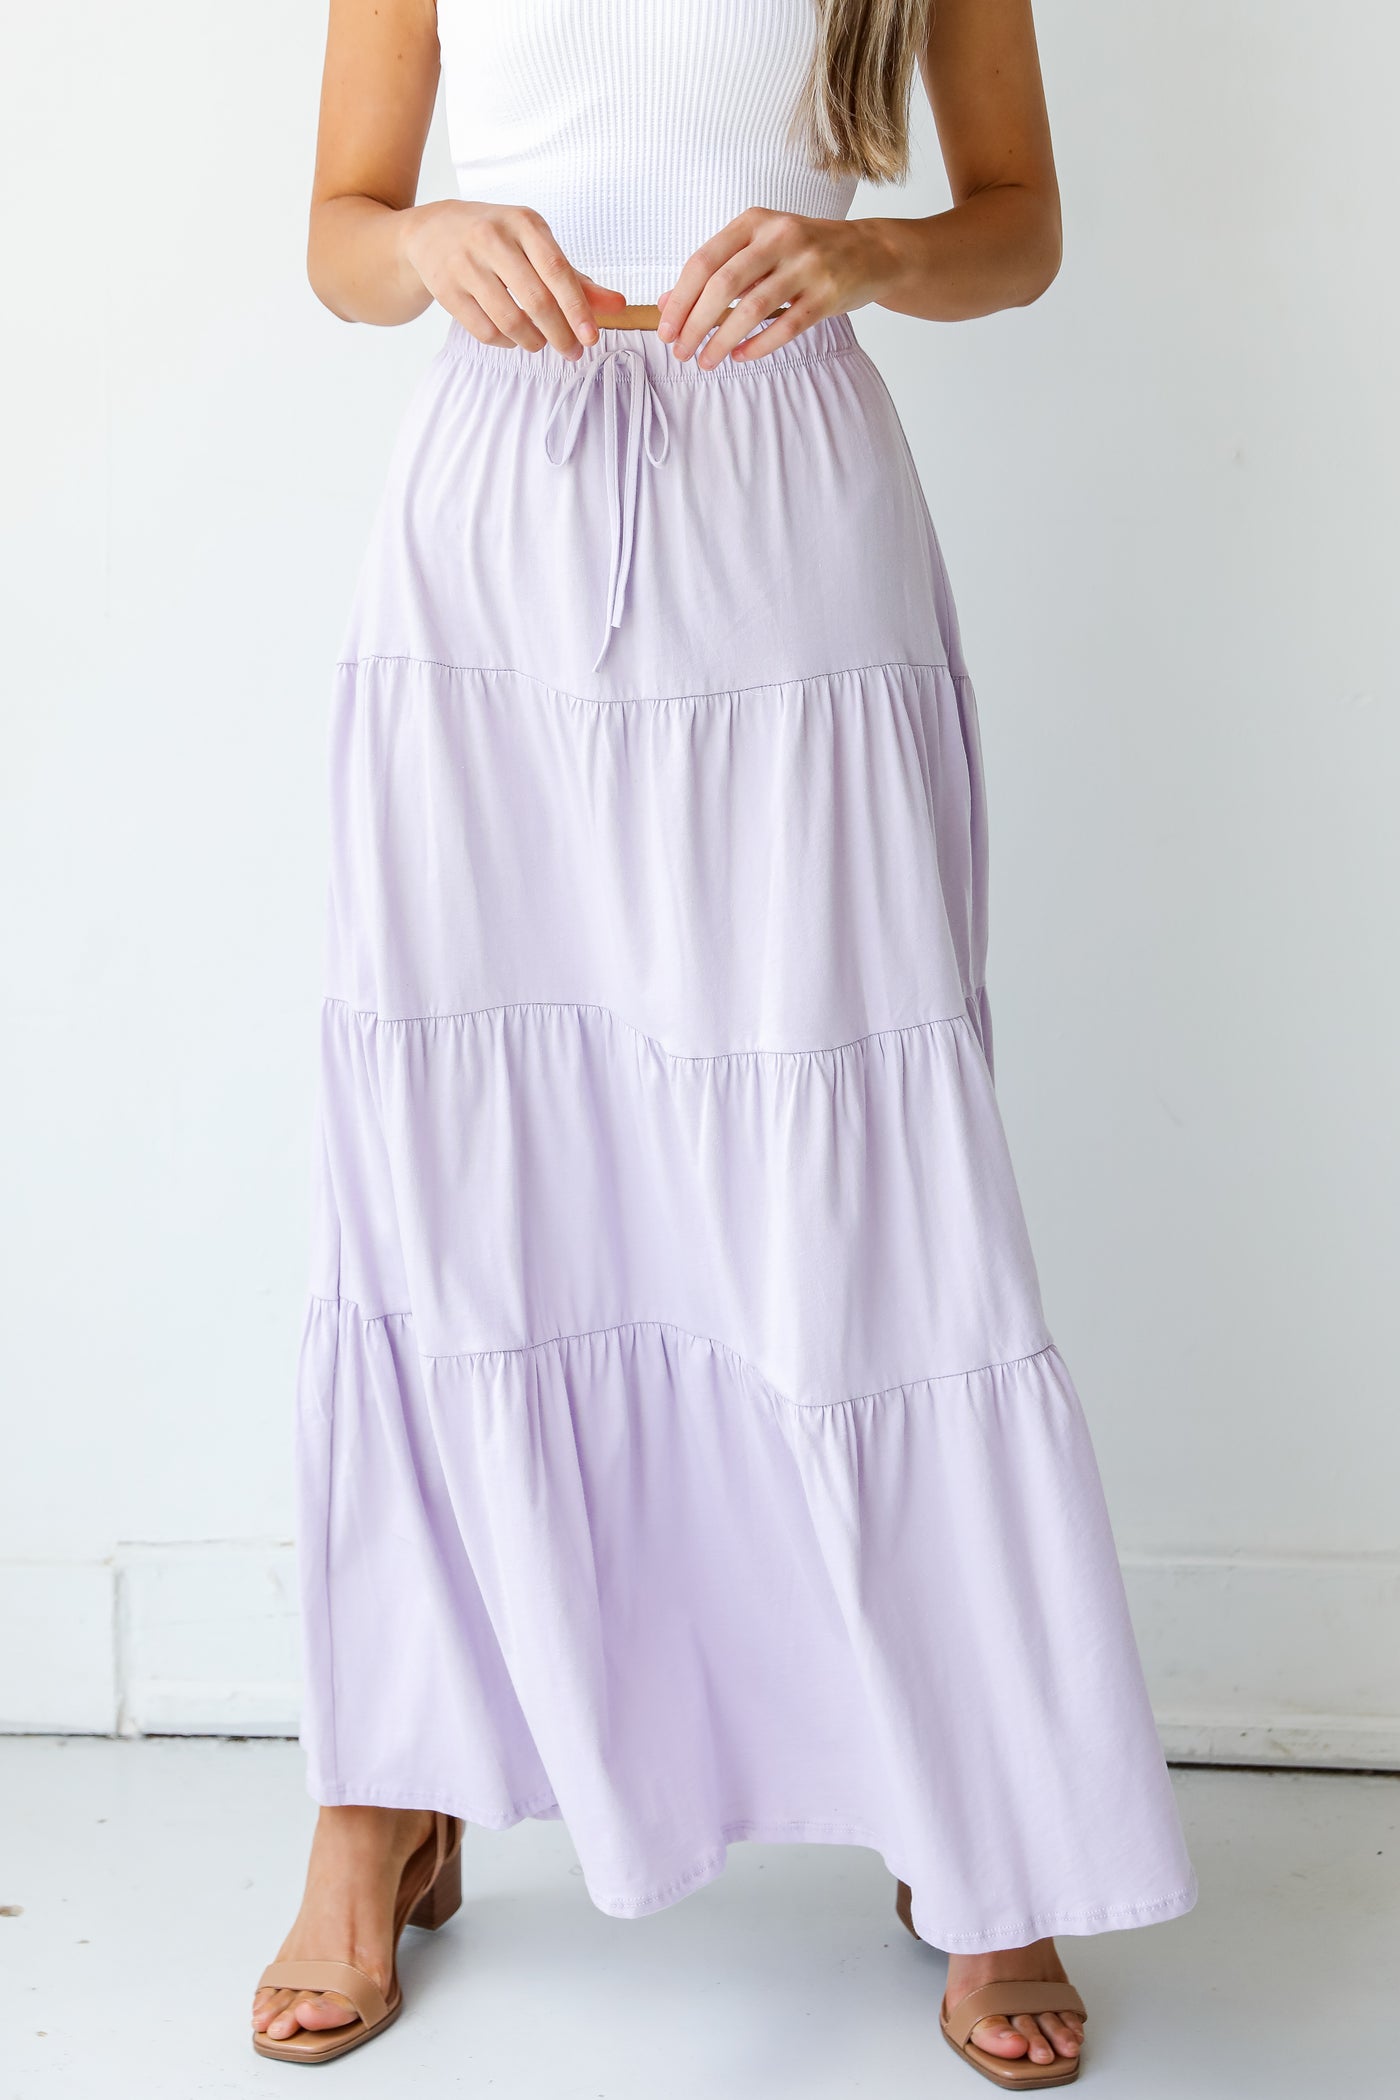 Tiered Maxi Skirt in lilac on model